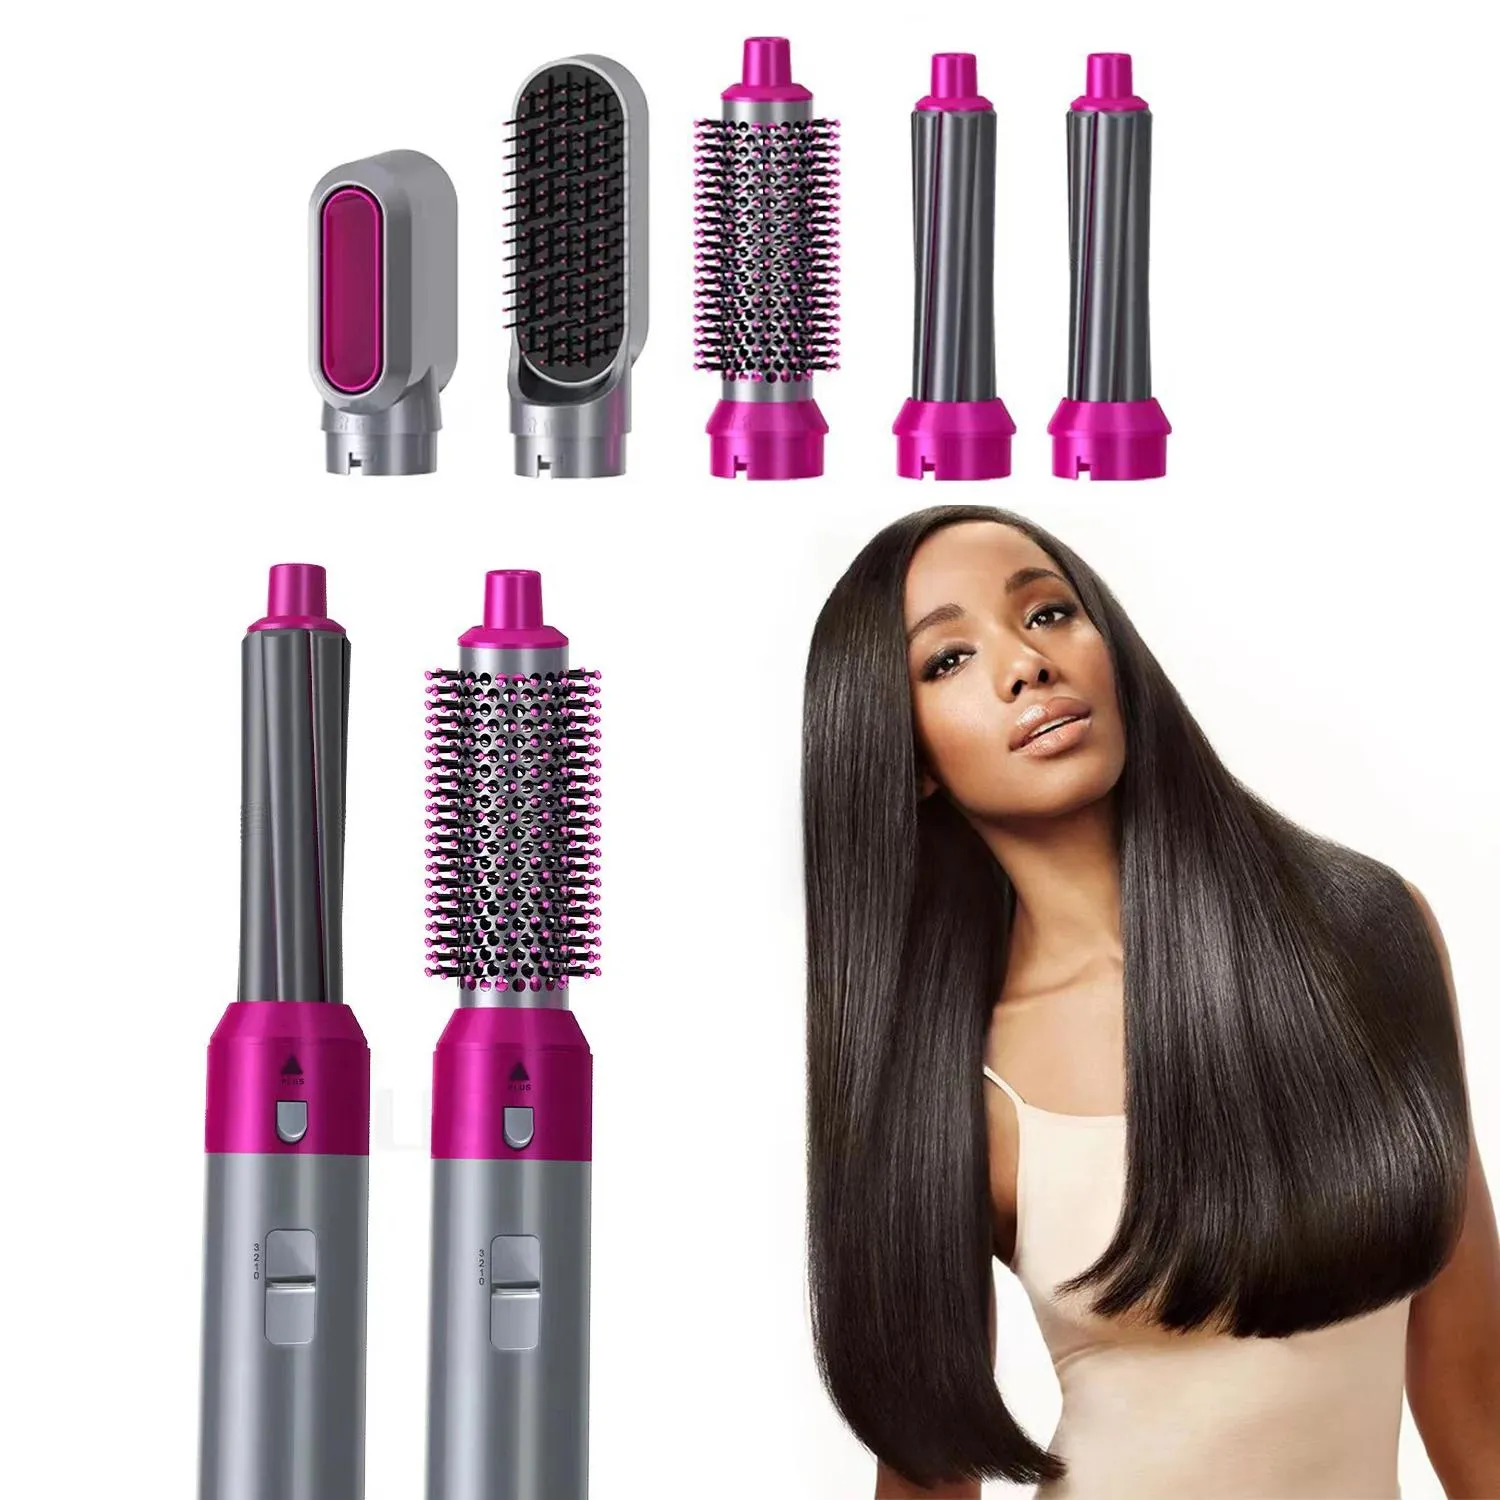 Dryer 5 in 1 Curling Iron Straightening Brush Negative Ion Hair Dryer Detachable Curling Iron and Brush Set